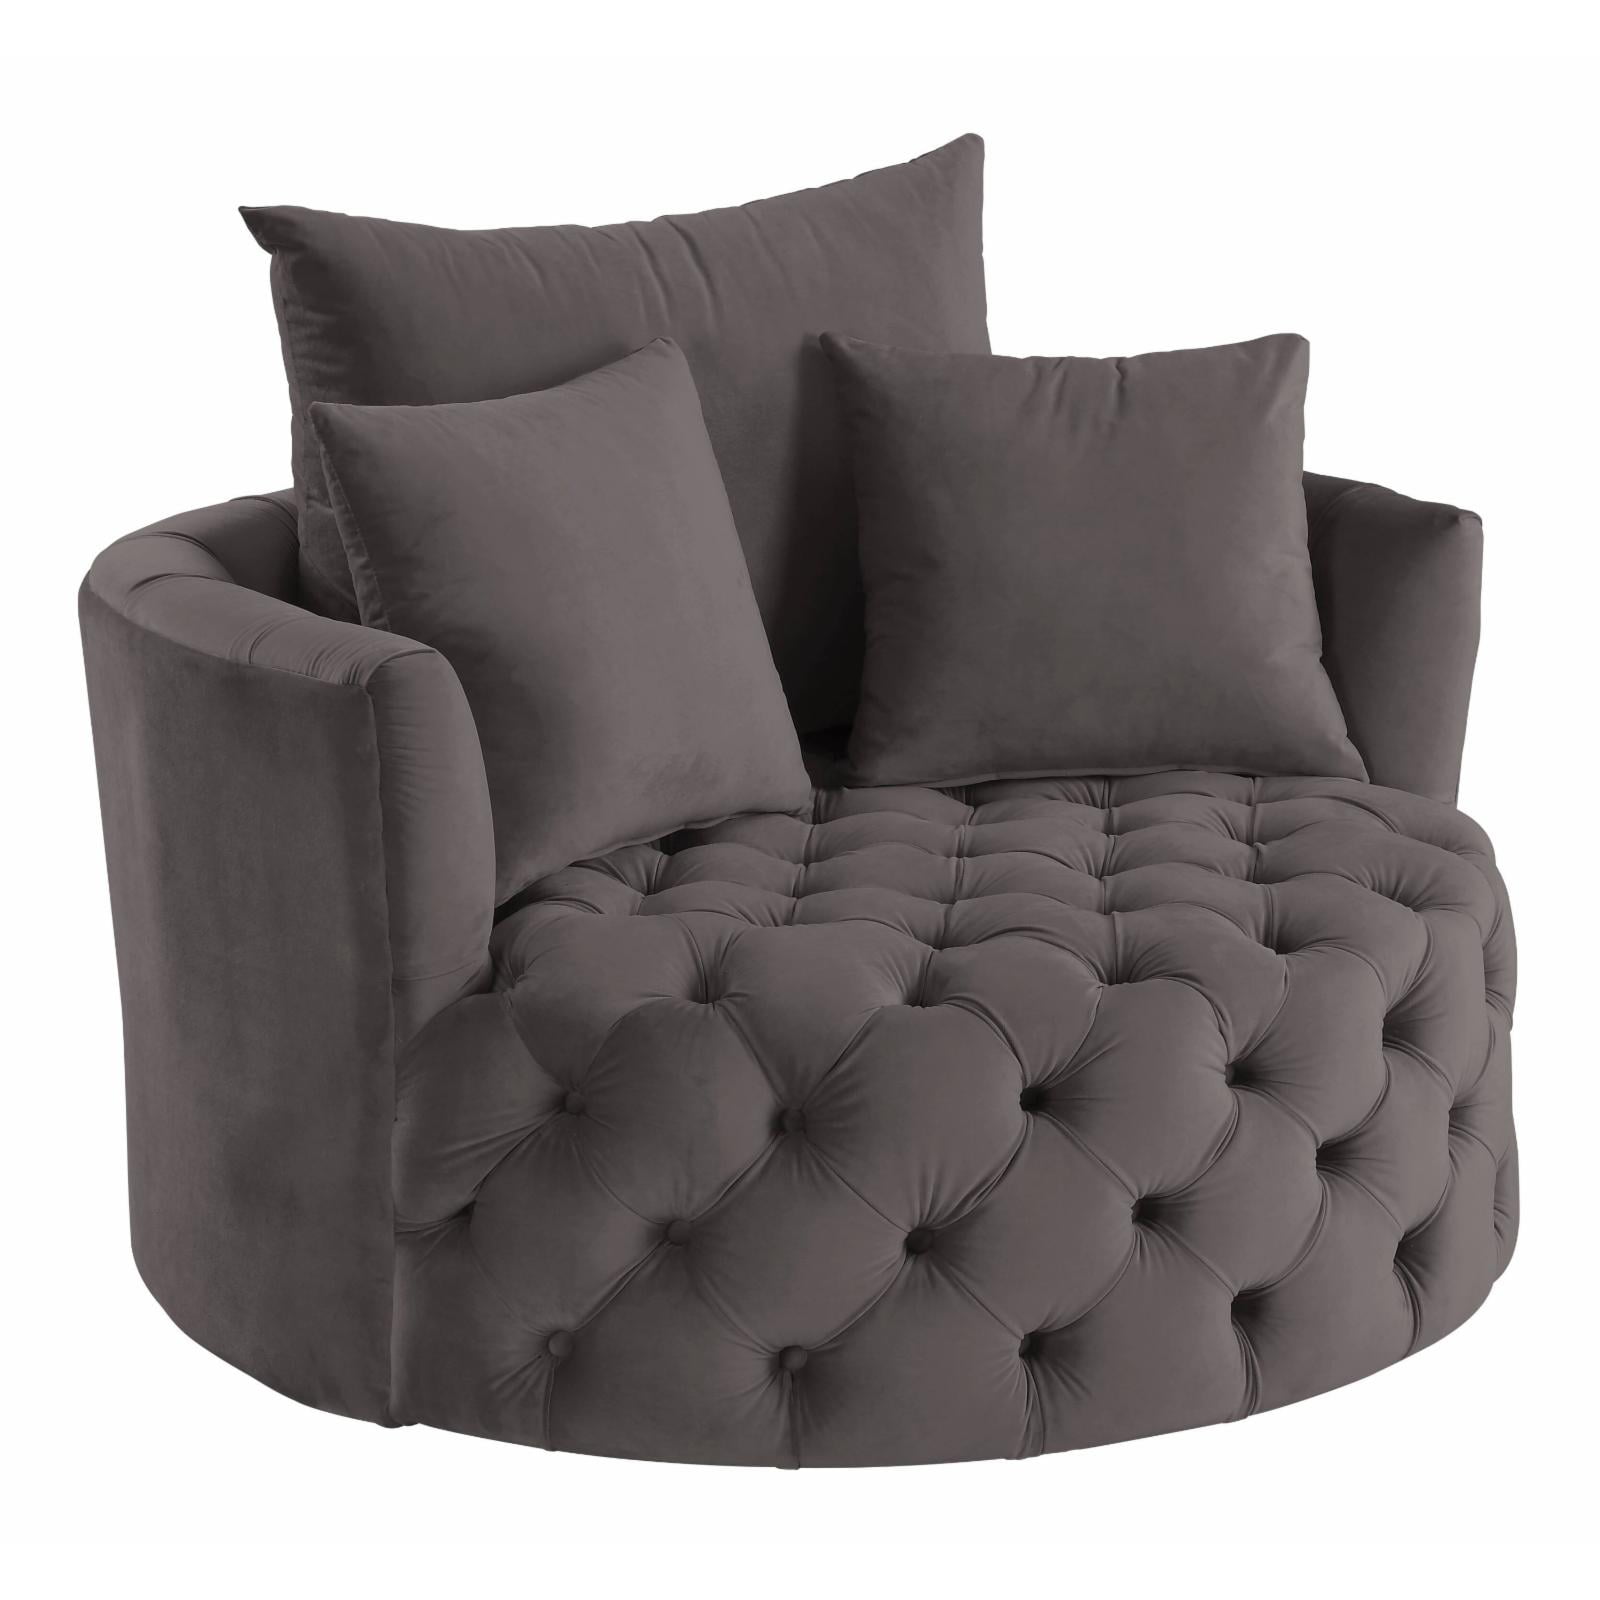 Picture of Acme Furniture AC00292 43 x 43 x 26 in. Zunyas Accent Chair with Swivel, Gray Velvet